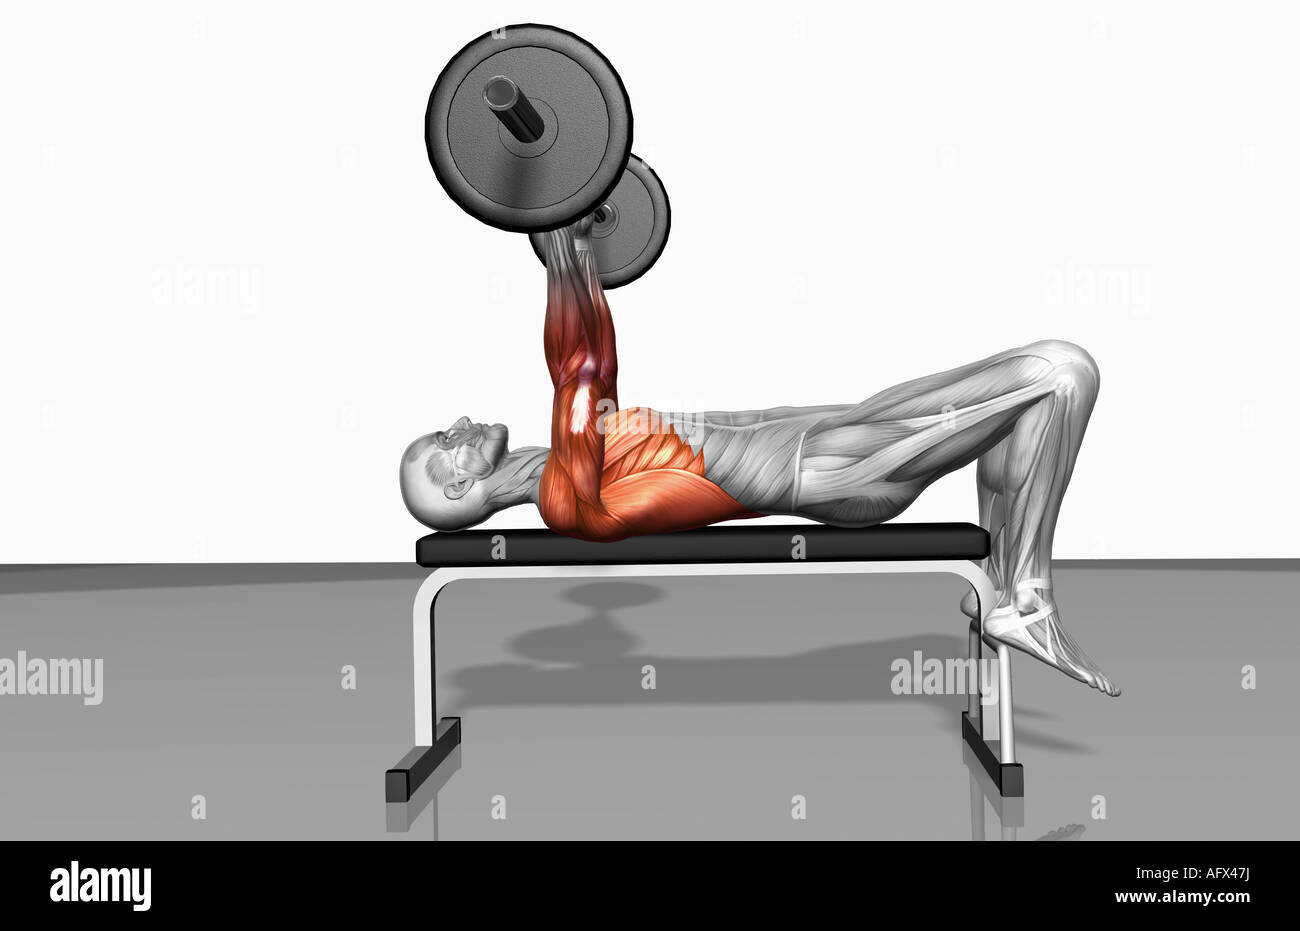 Overhead barbell triceps extension (Part 1 of 2 Stock Photo - Alamy